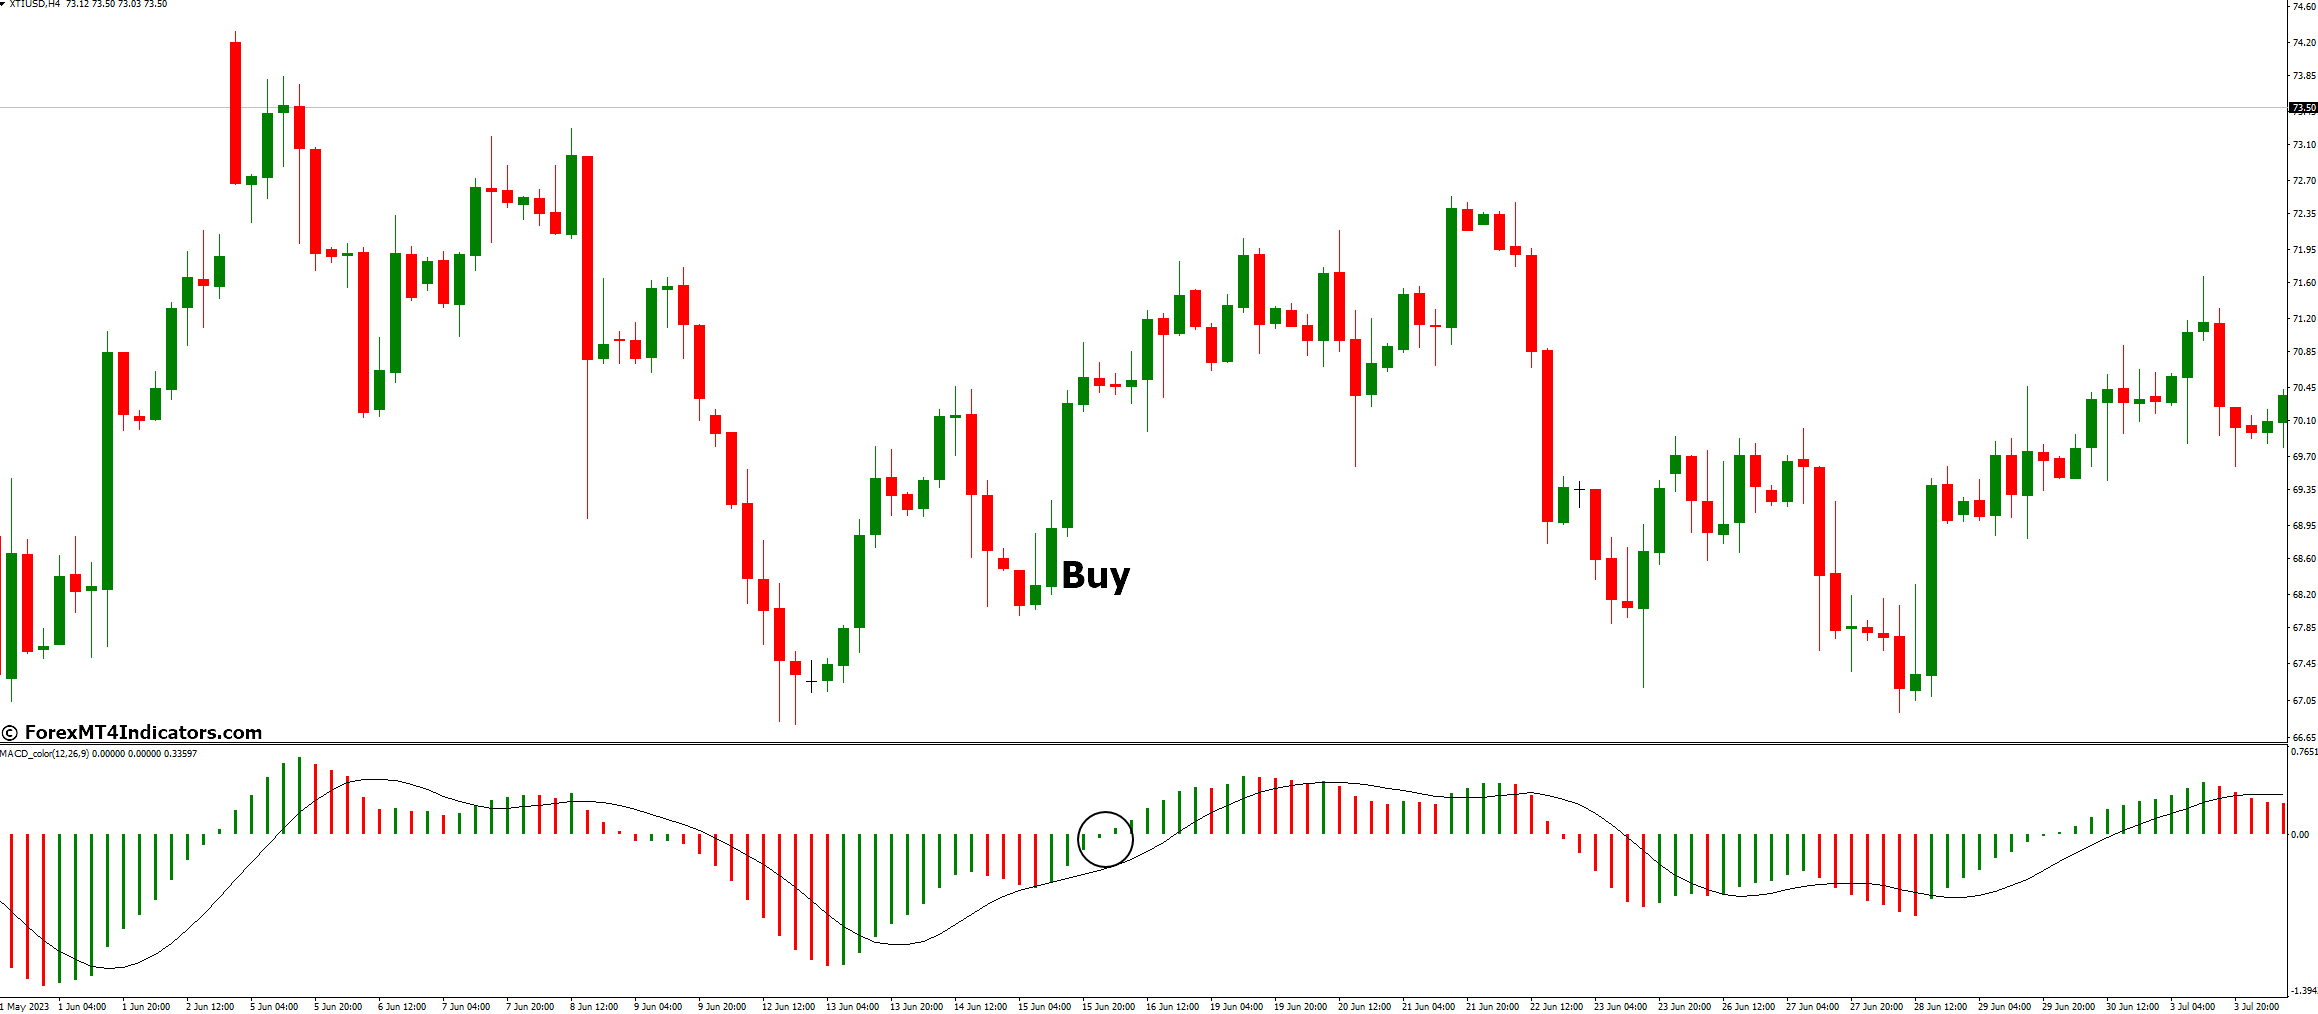 How to Trade with MACD Color Indicator - Buy Entry